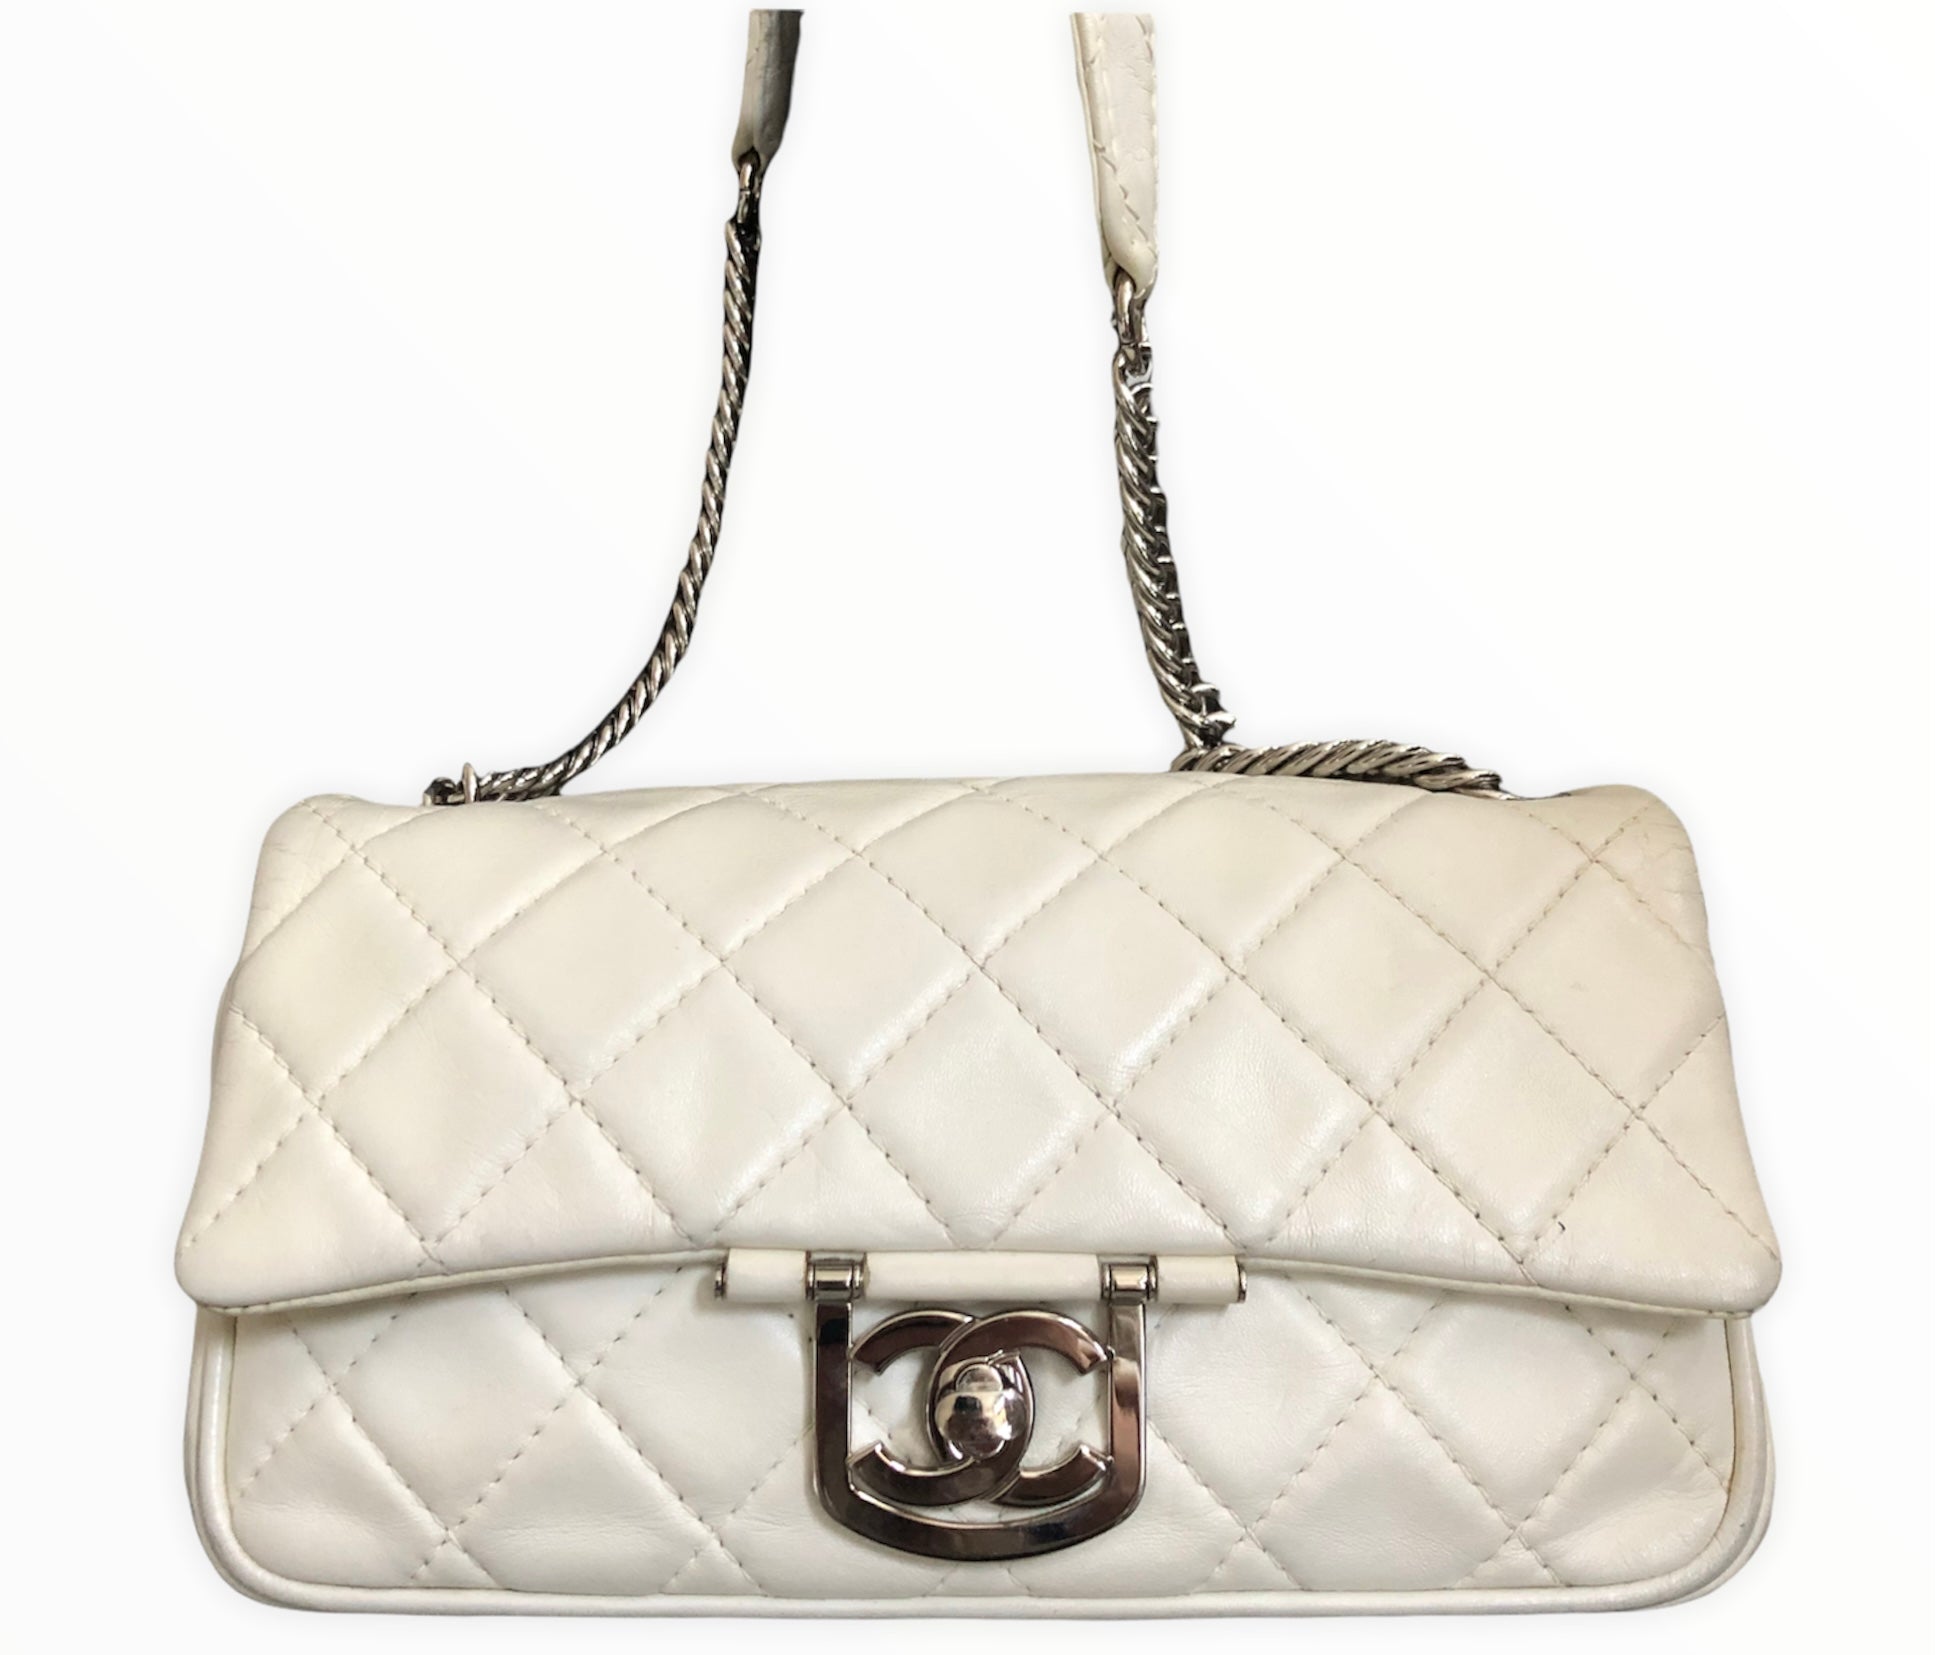 Chanel White Quilted Lambskin Leather Jumbo Classic Single Flap